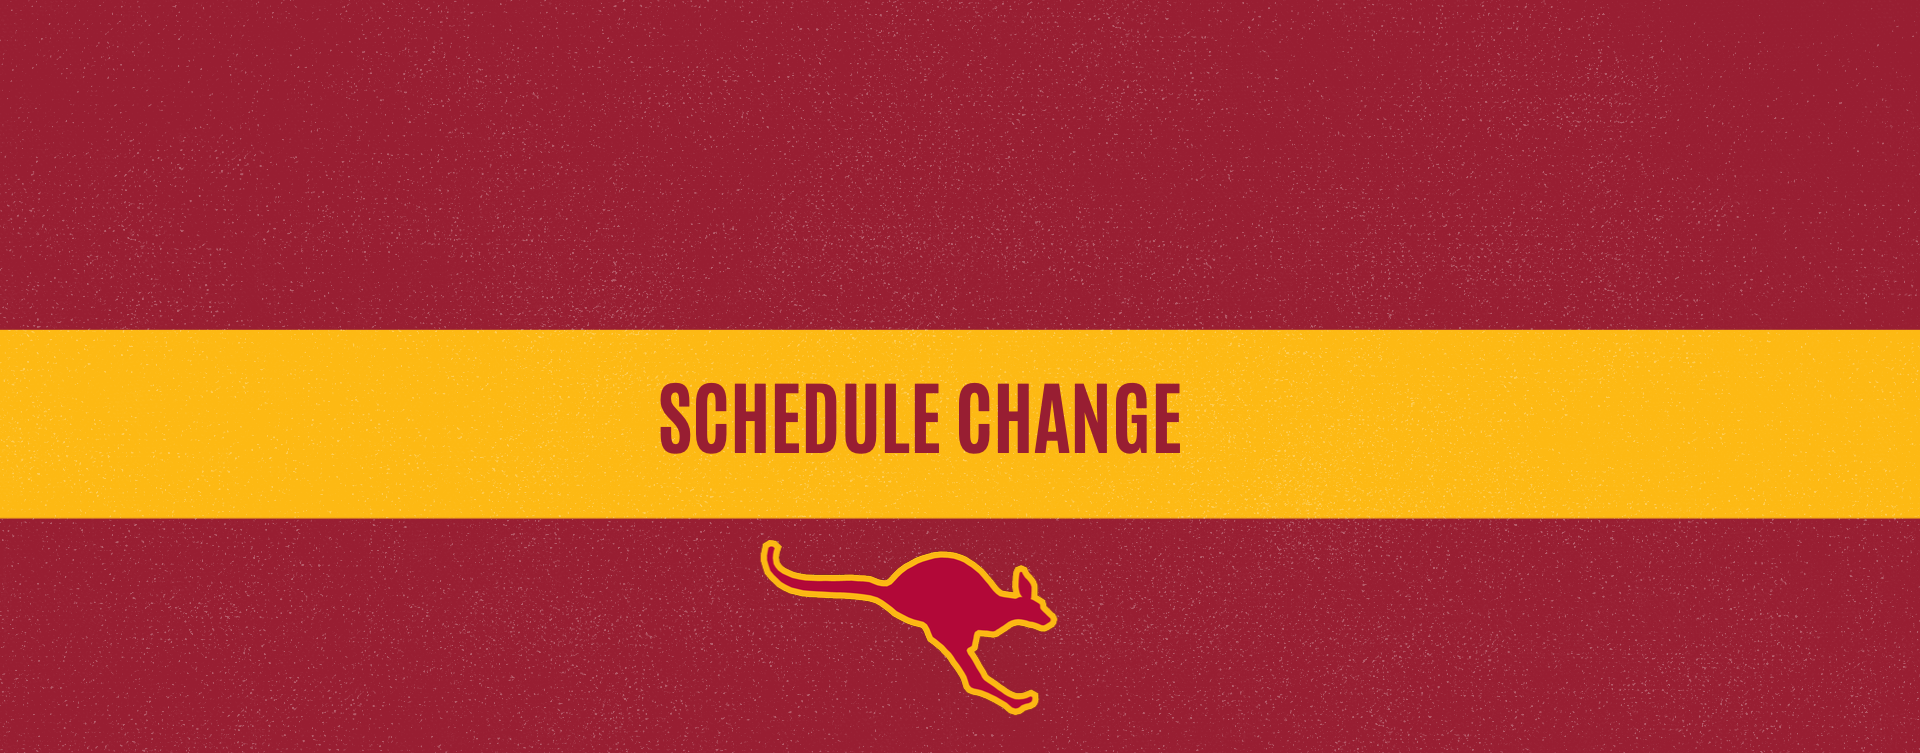 Schedule Changes for 'Roo Baseball